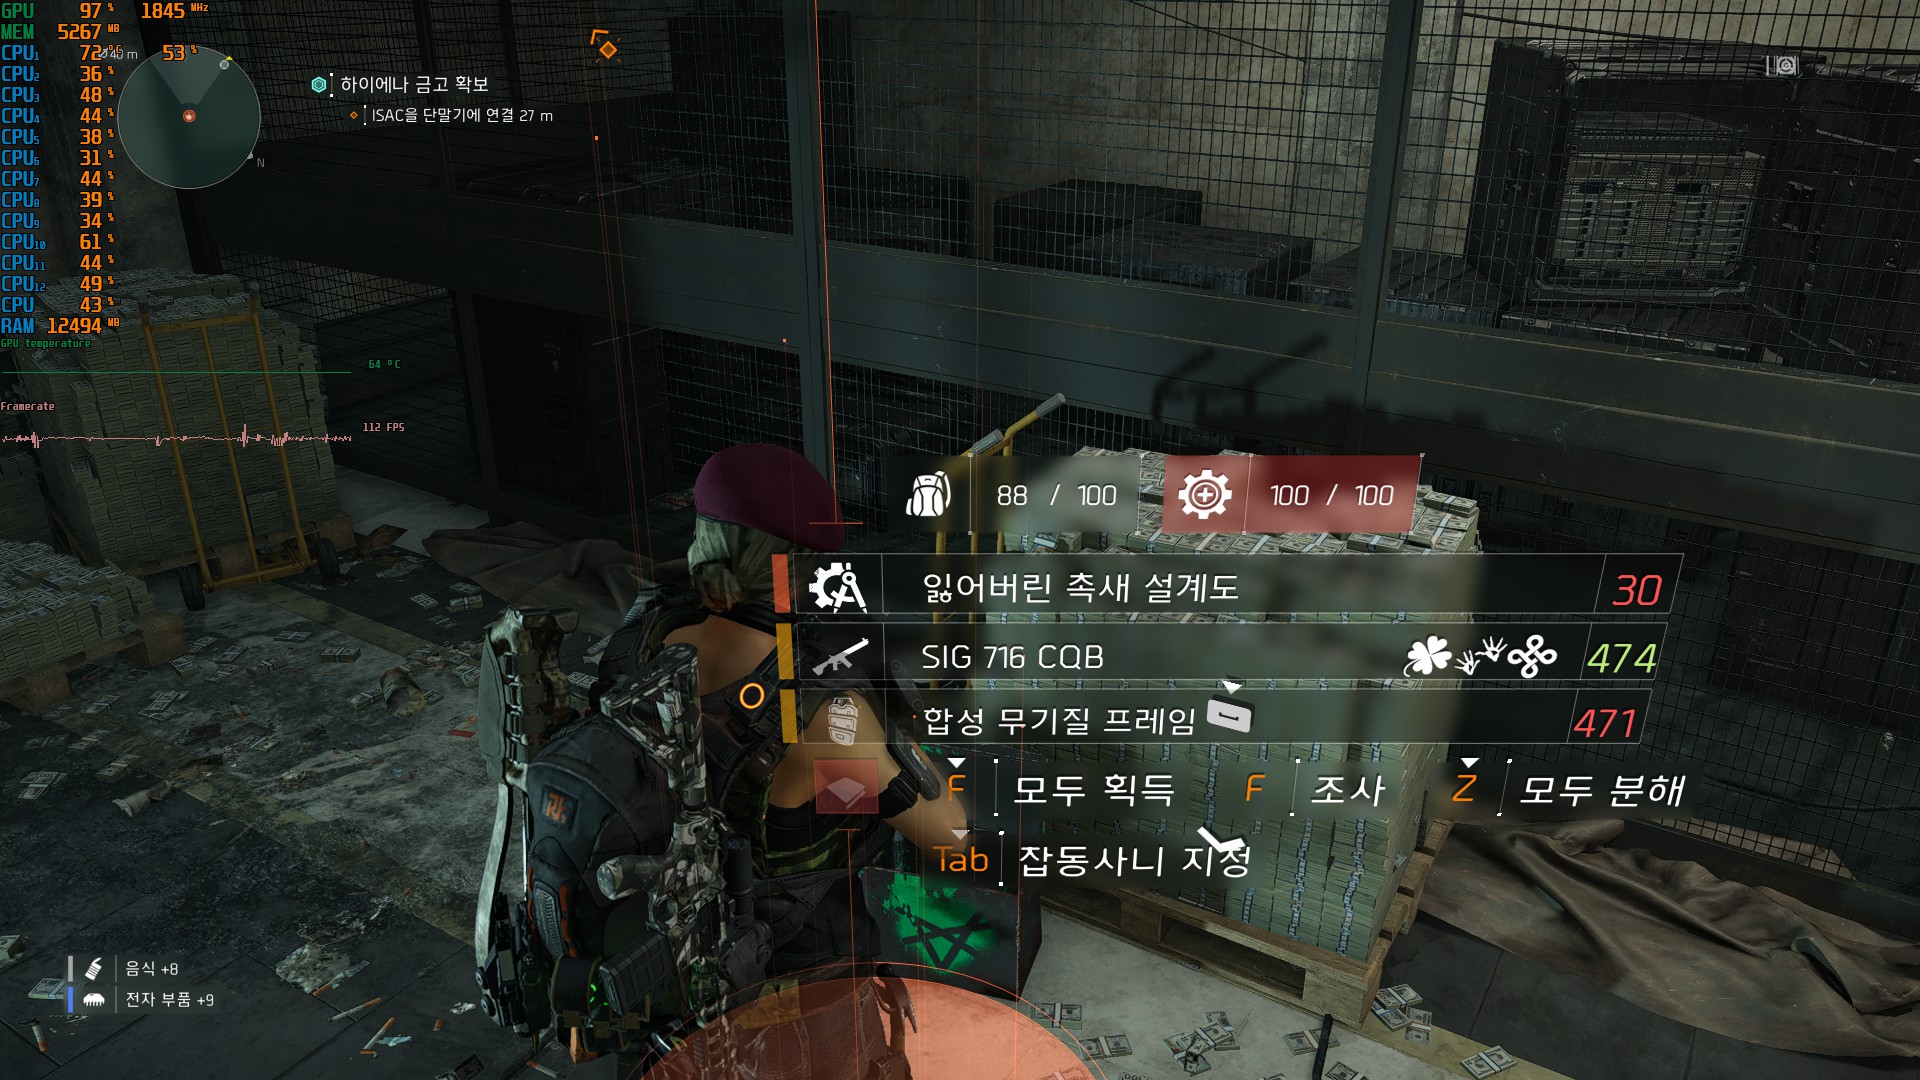 Tom Clancy's The Division® 22019-4-22-23-57-4.jpg